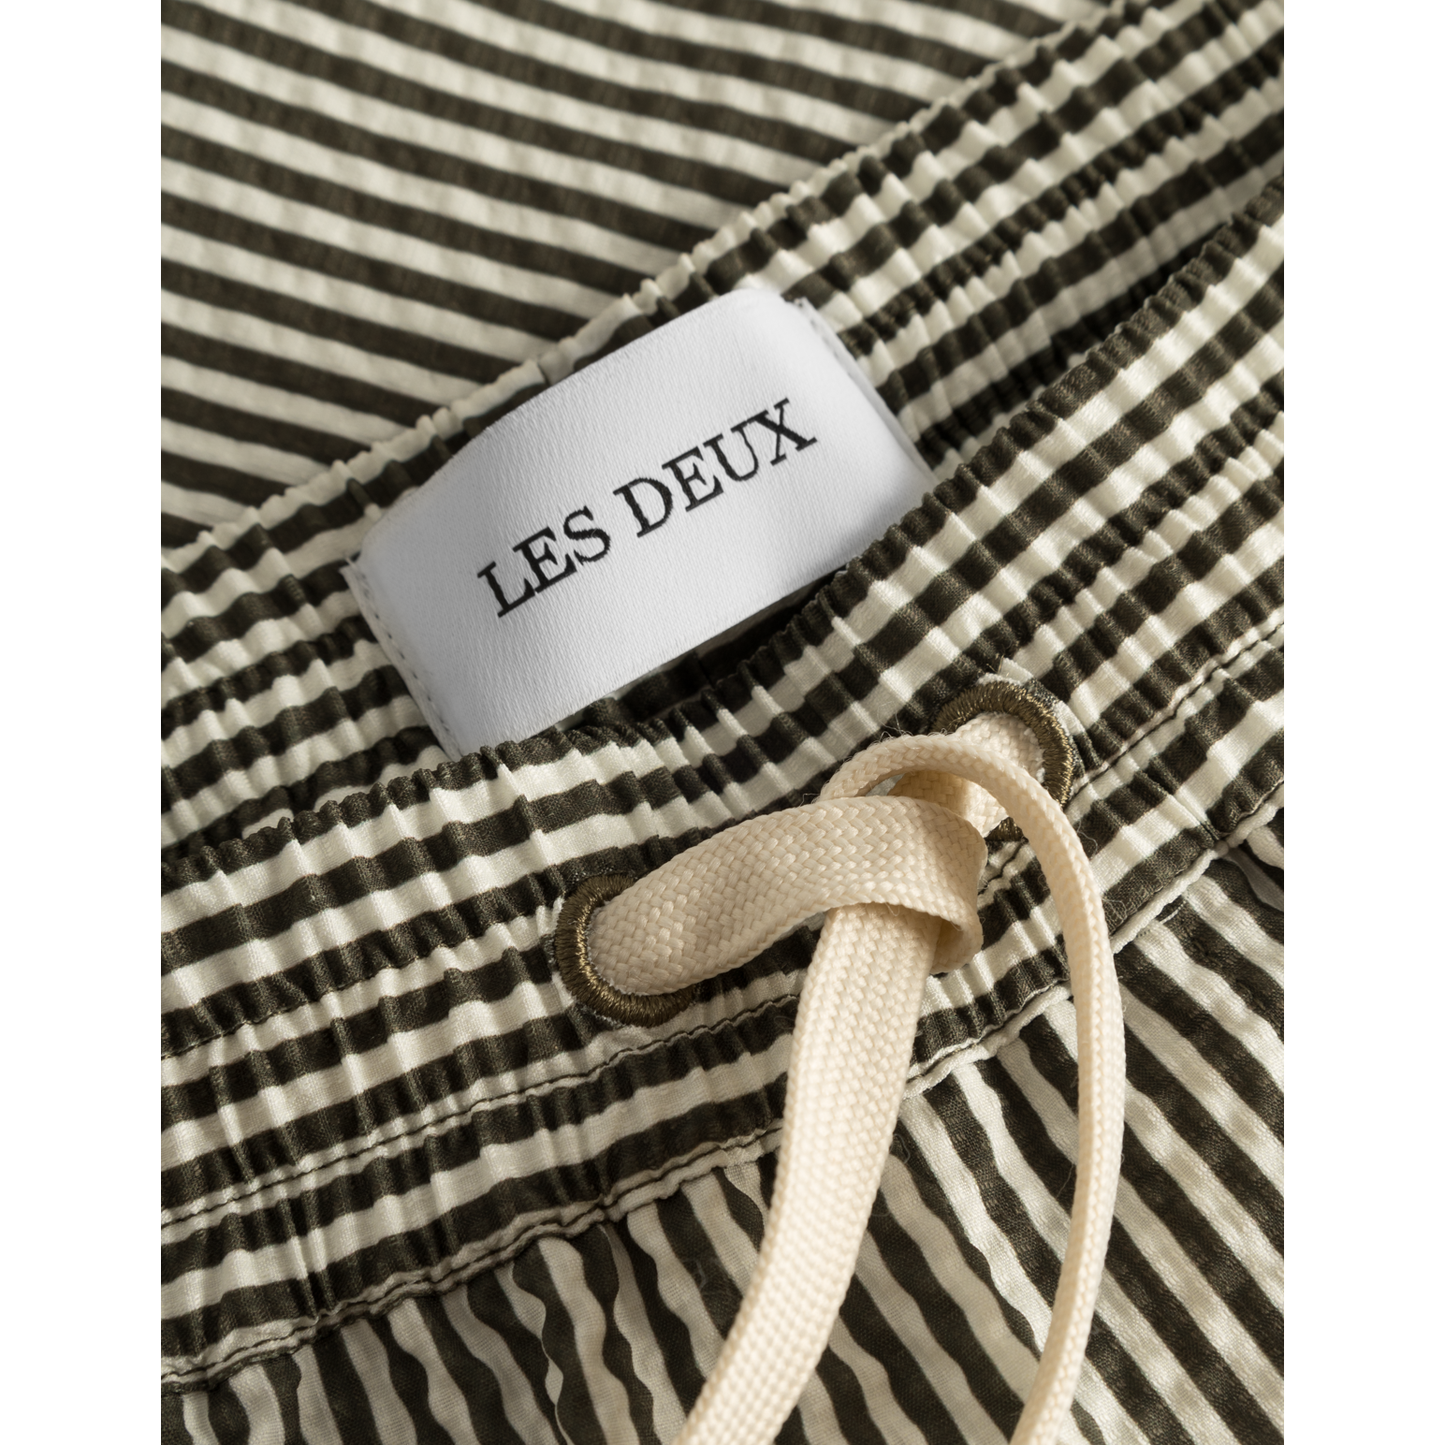 Close-up of Stan Stripe Seersucker Swim Shorts with a Les Deux label and beige drawstring waist.